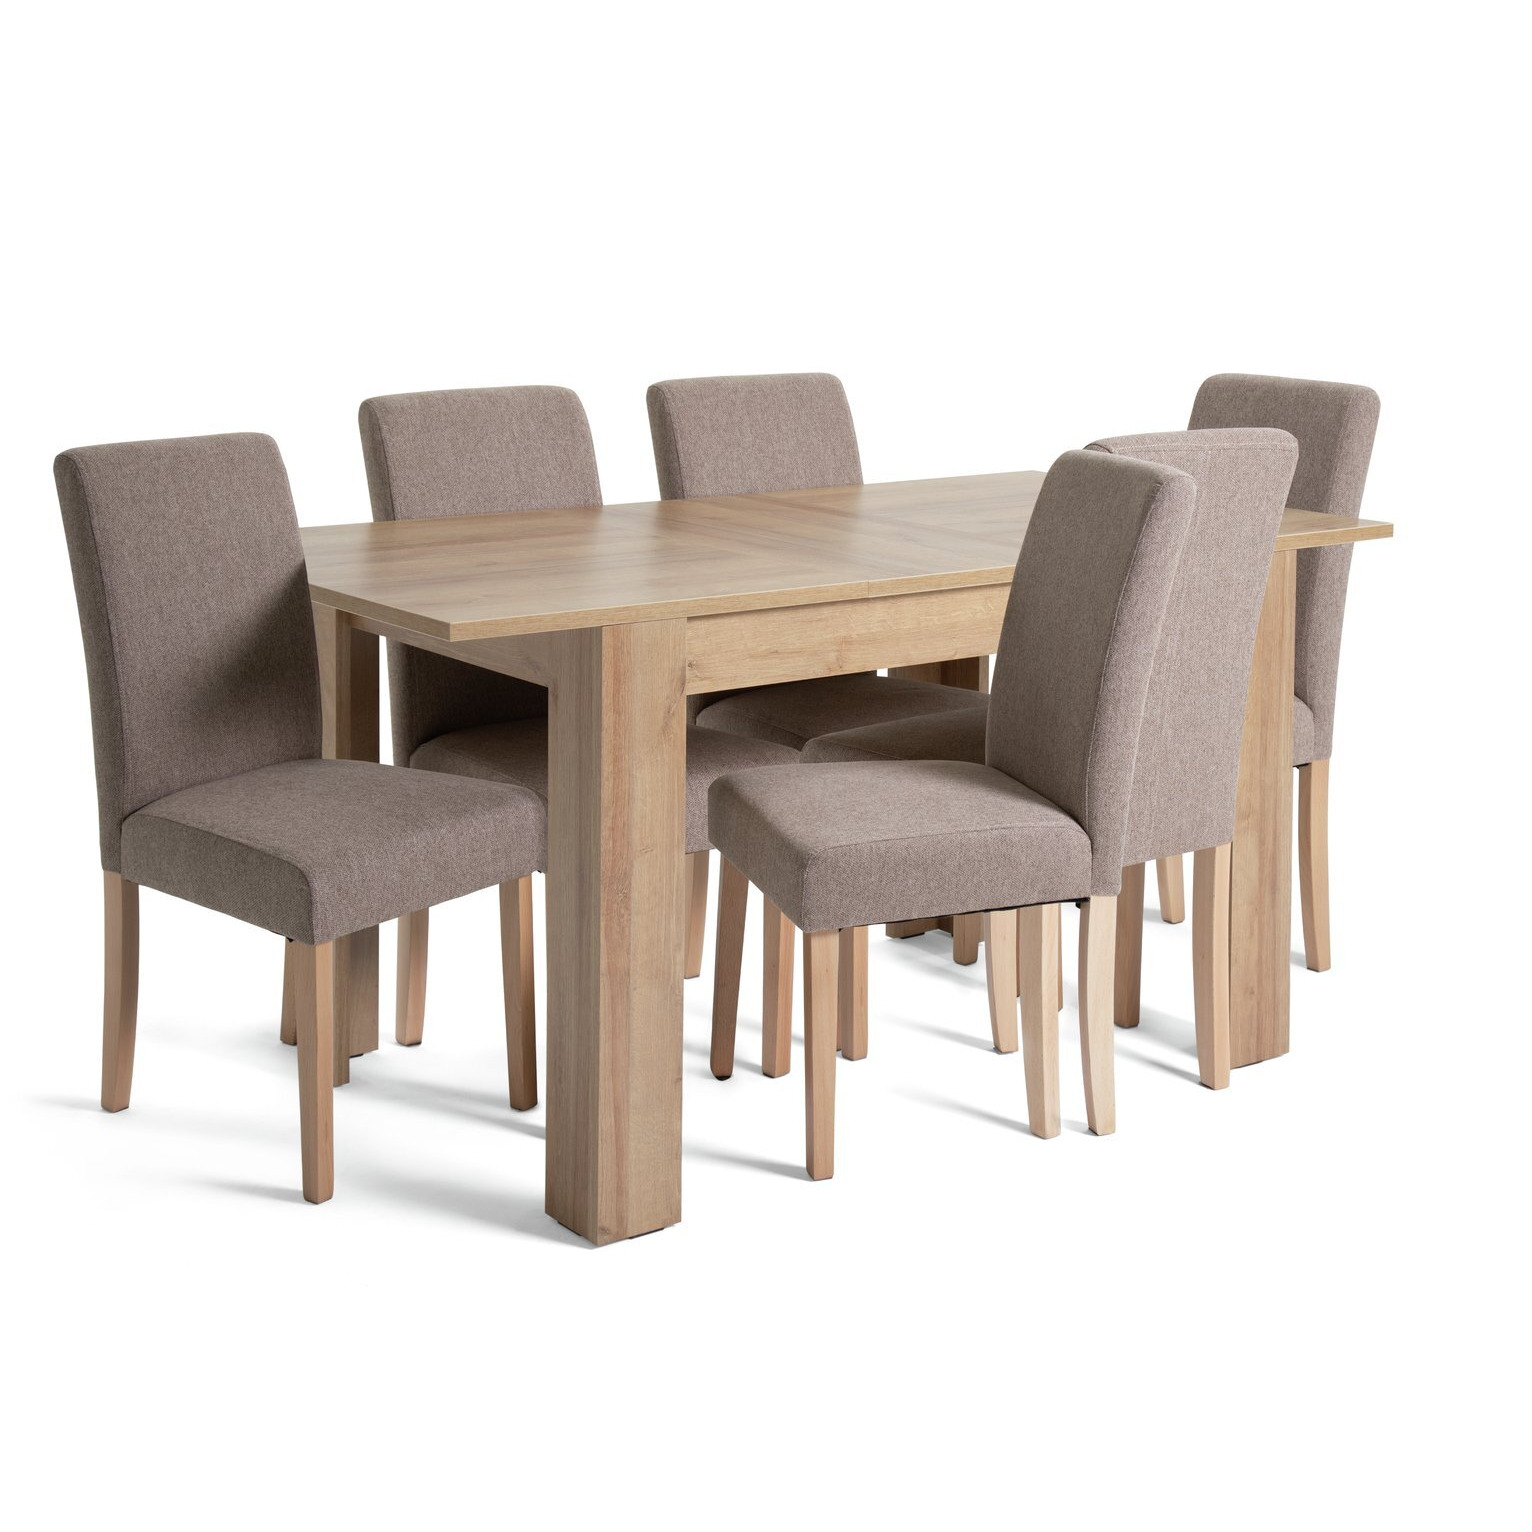 Argos Home Miami 4-6 Seater Extending Table & 6 Brown Chairs - image 1